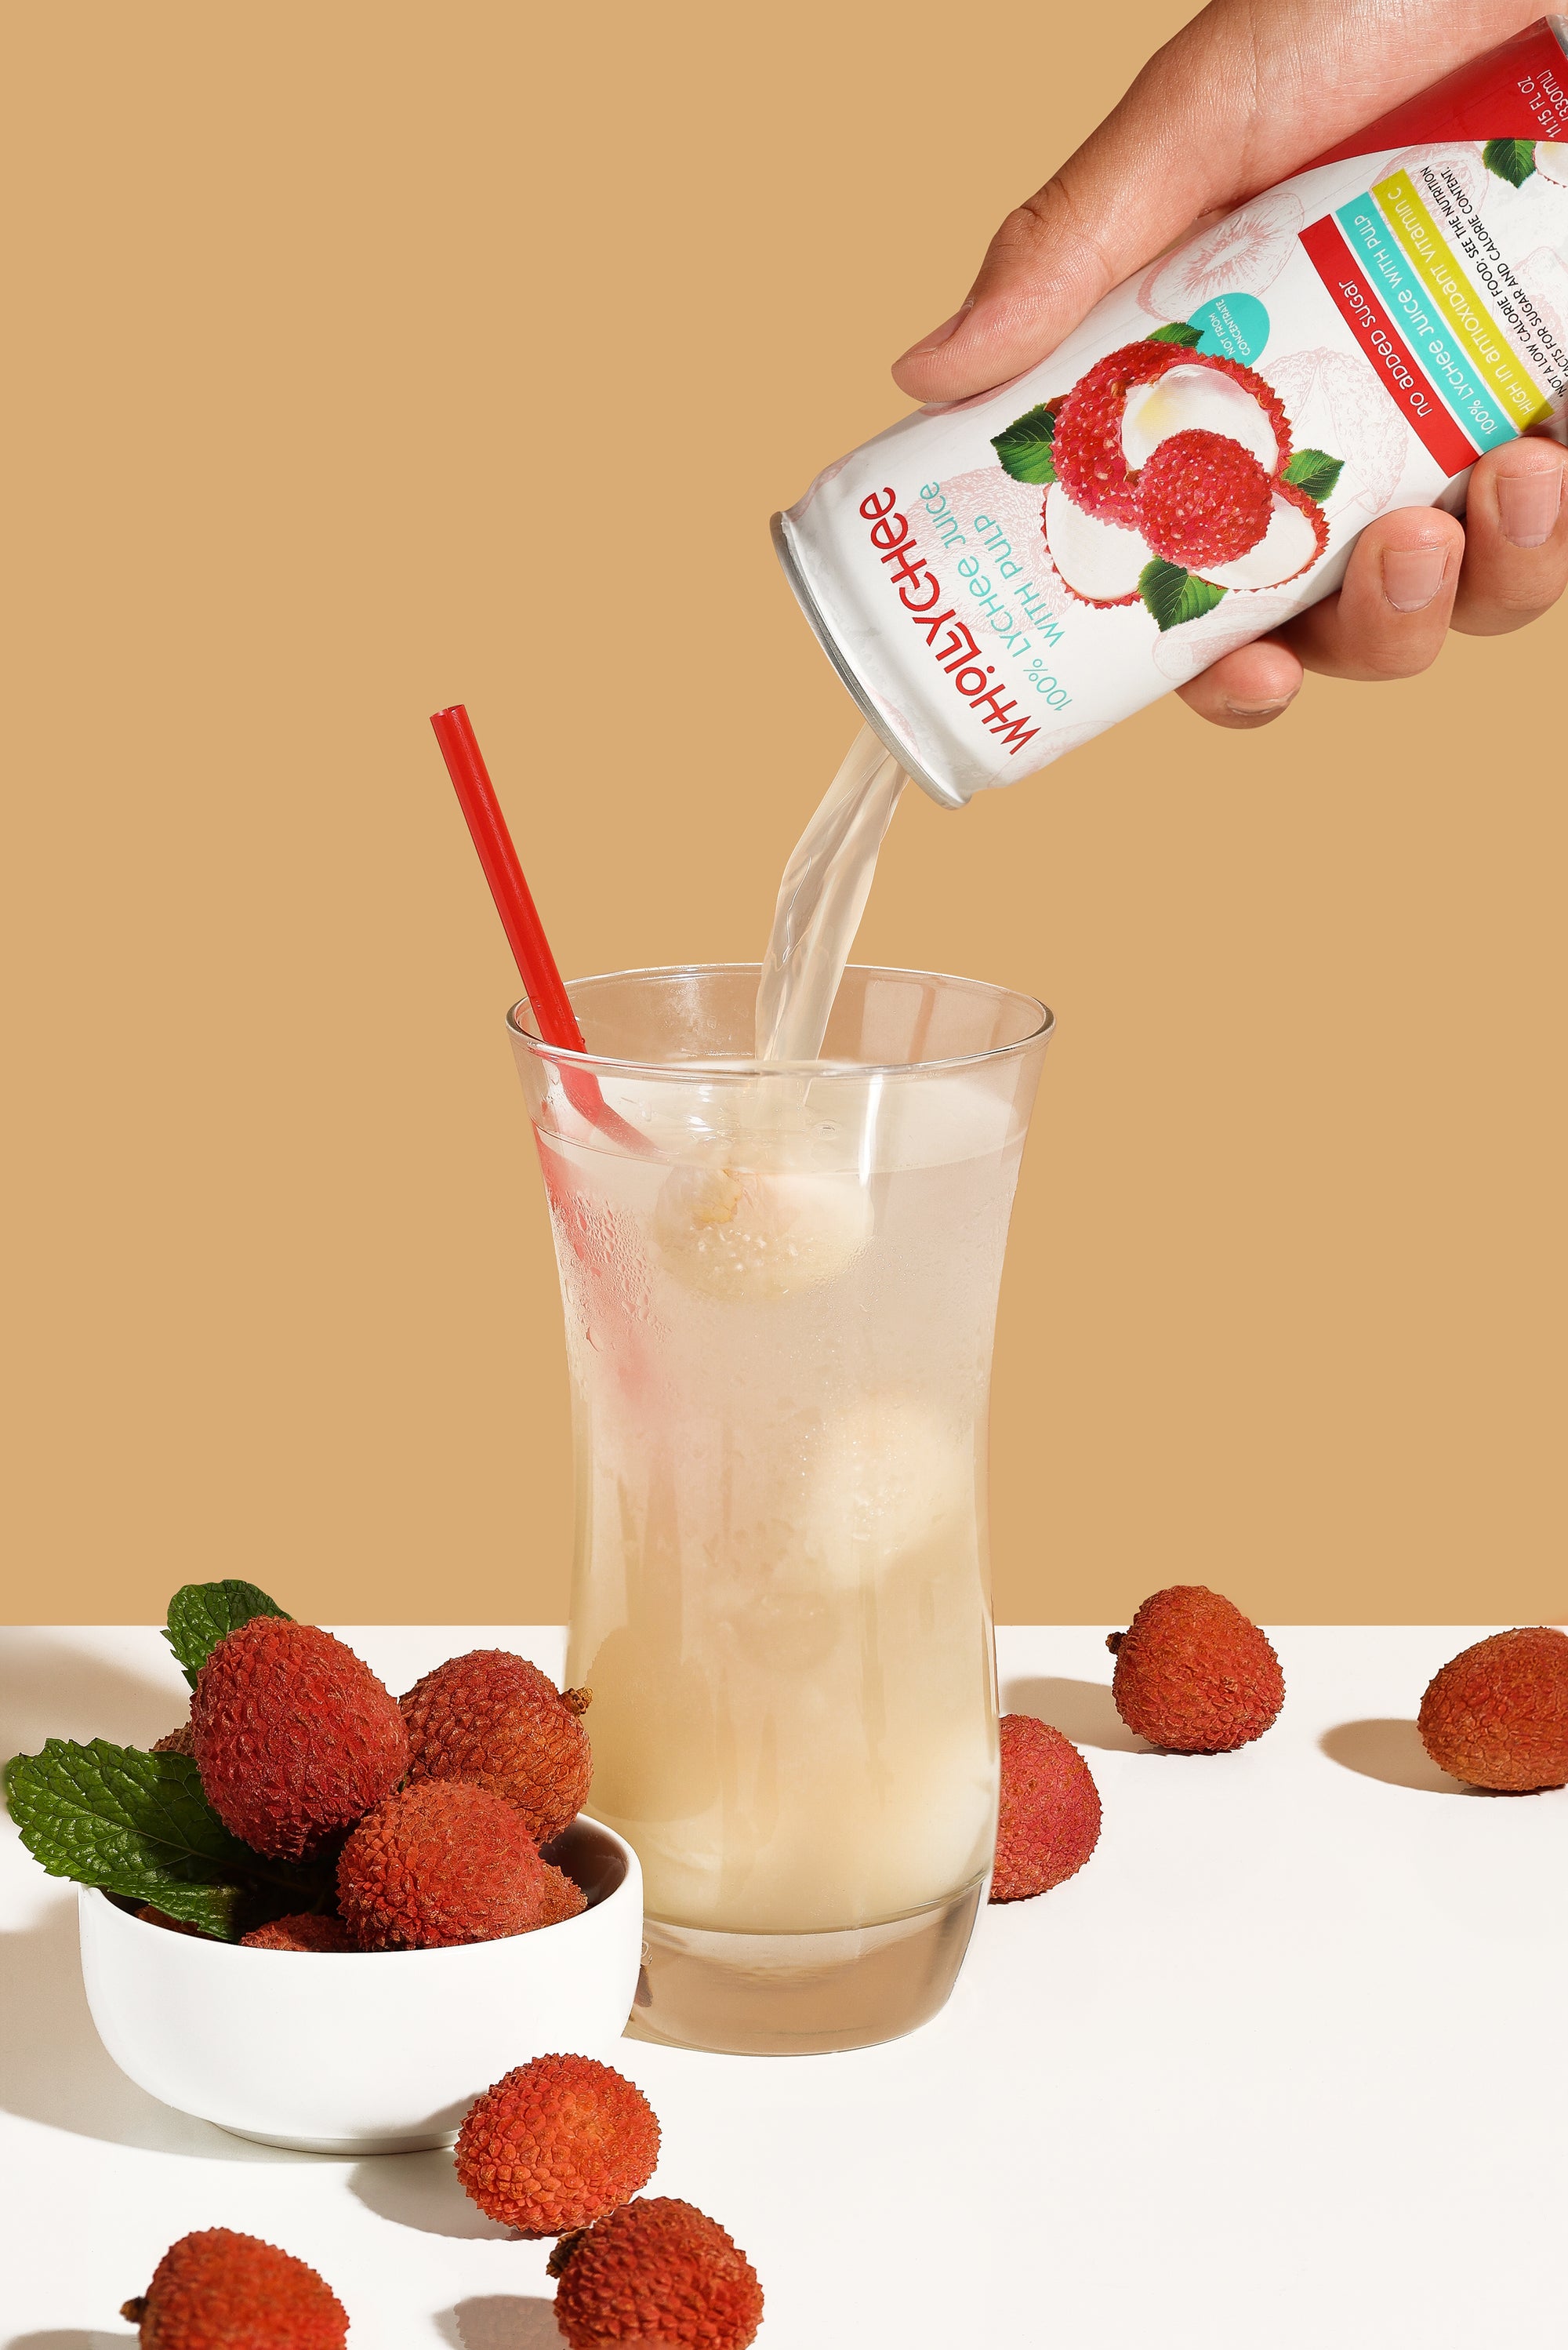 Whollychee - 100% Lychee Juice with Pulp - 11.15 Fl Oz